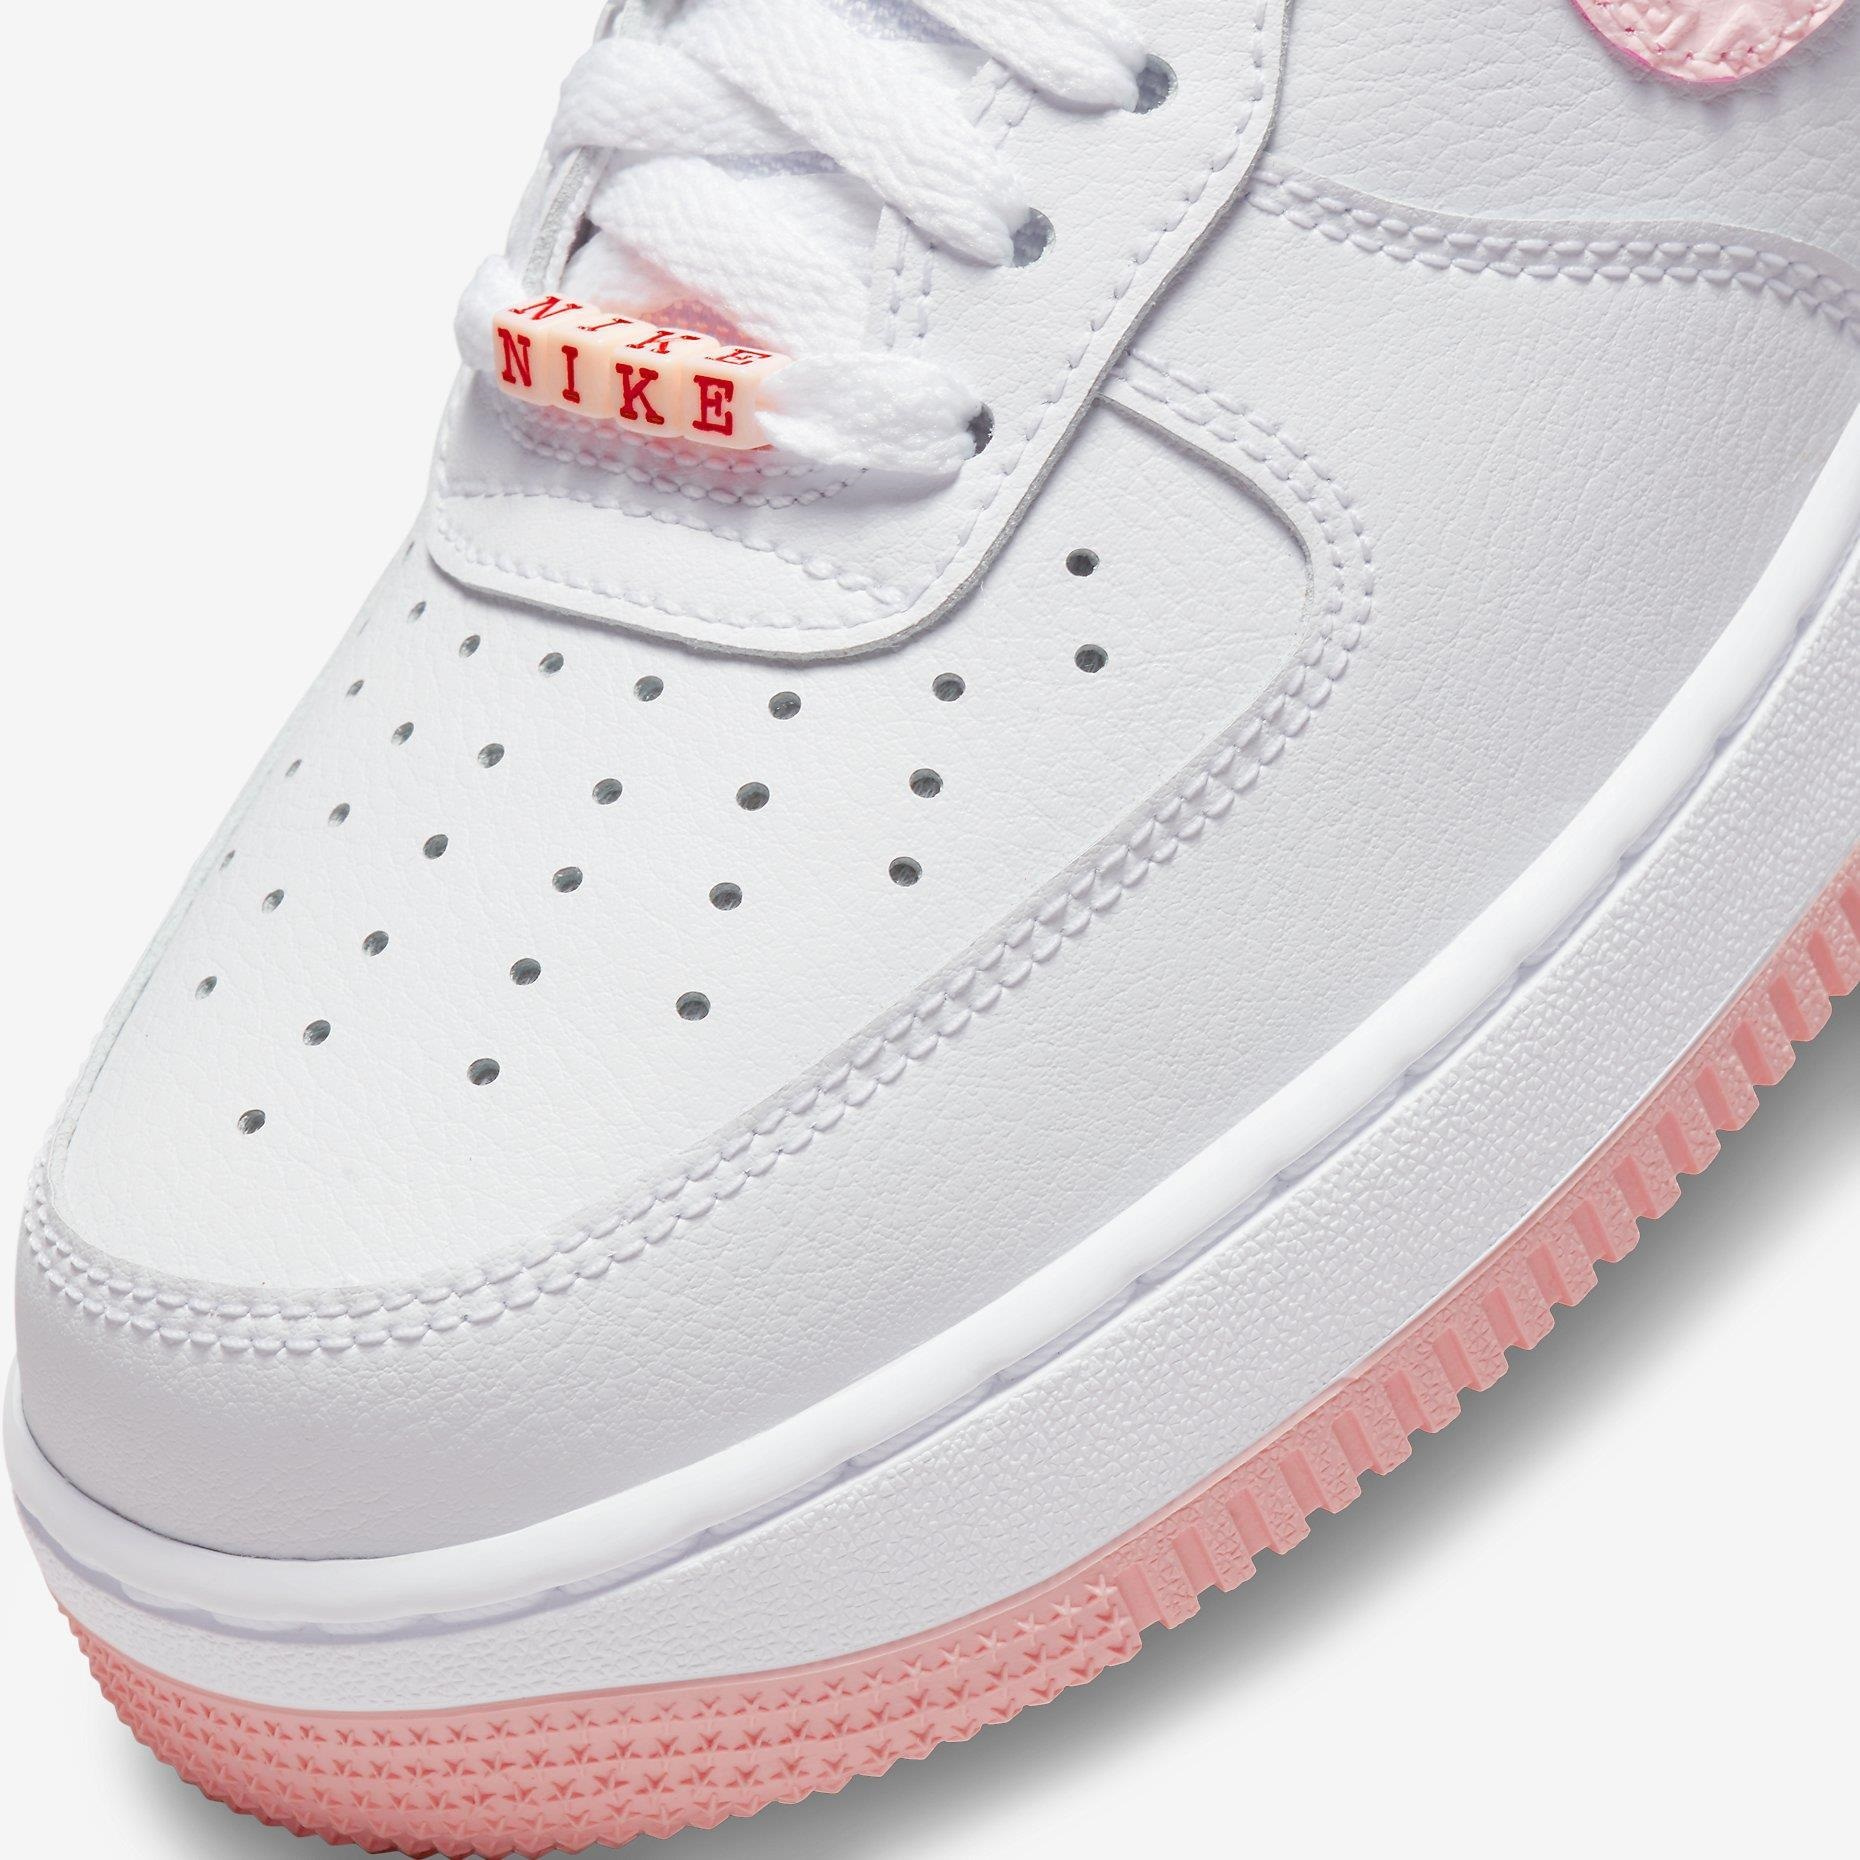 GIÀY THỂ THAO NỮ NIKE AIR FORCE 1 07 LOW VD VALENTINE´S DAY WHITE ATMOSPHERE UNIVERSITY RED SAIL DQ9320-100 7